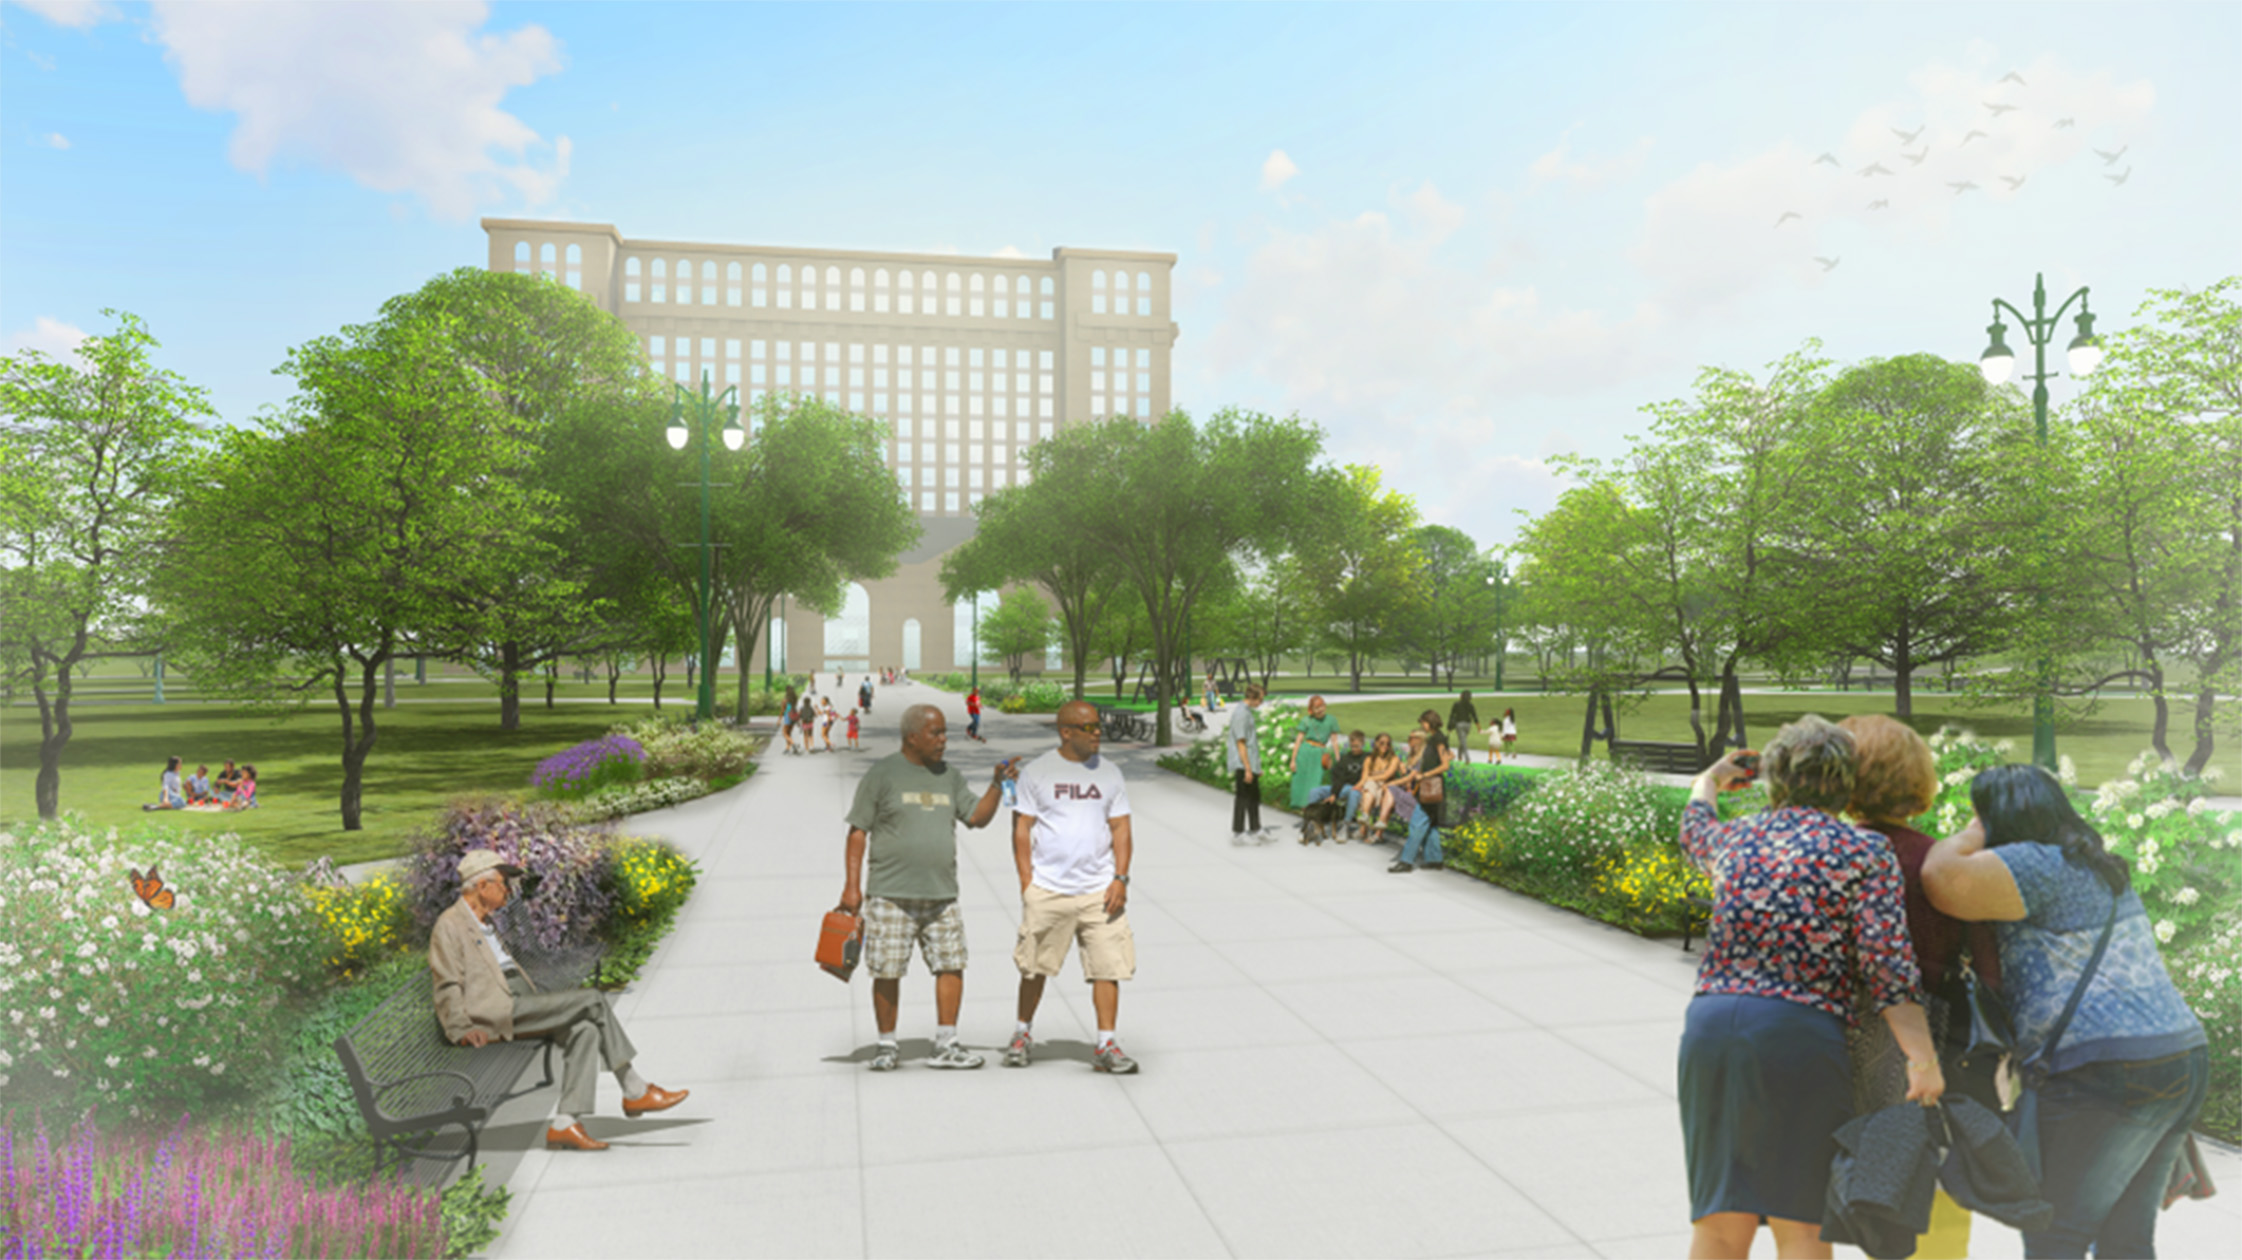 Rendering of the pedestrian promenade which replaces the vehicular boulevard